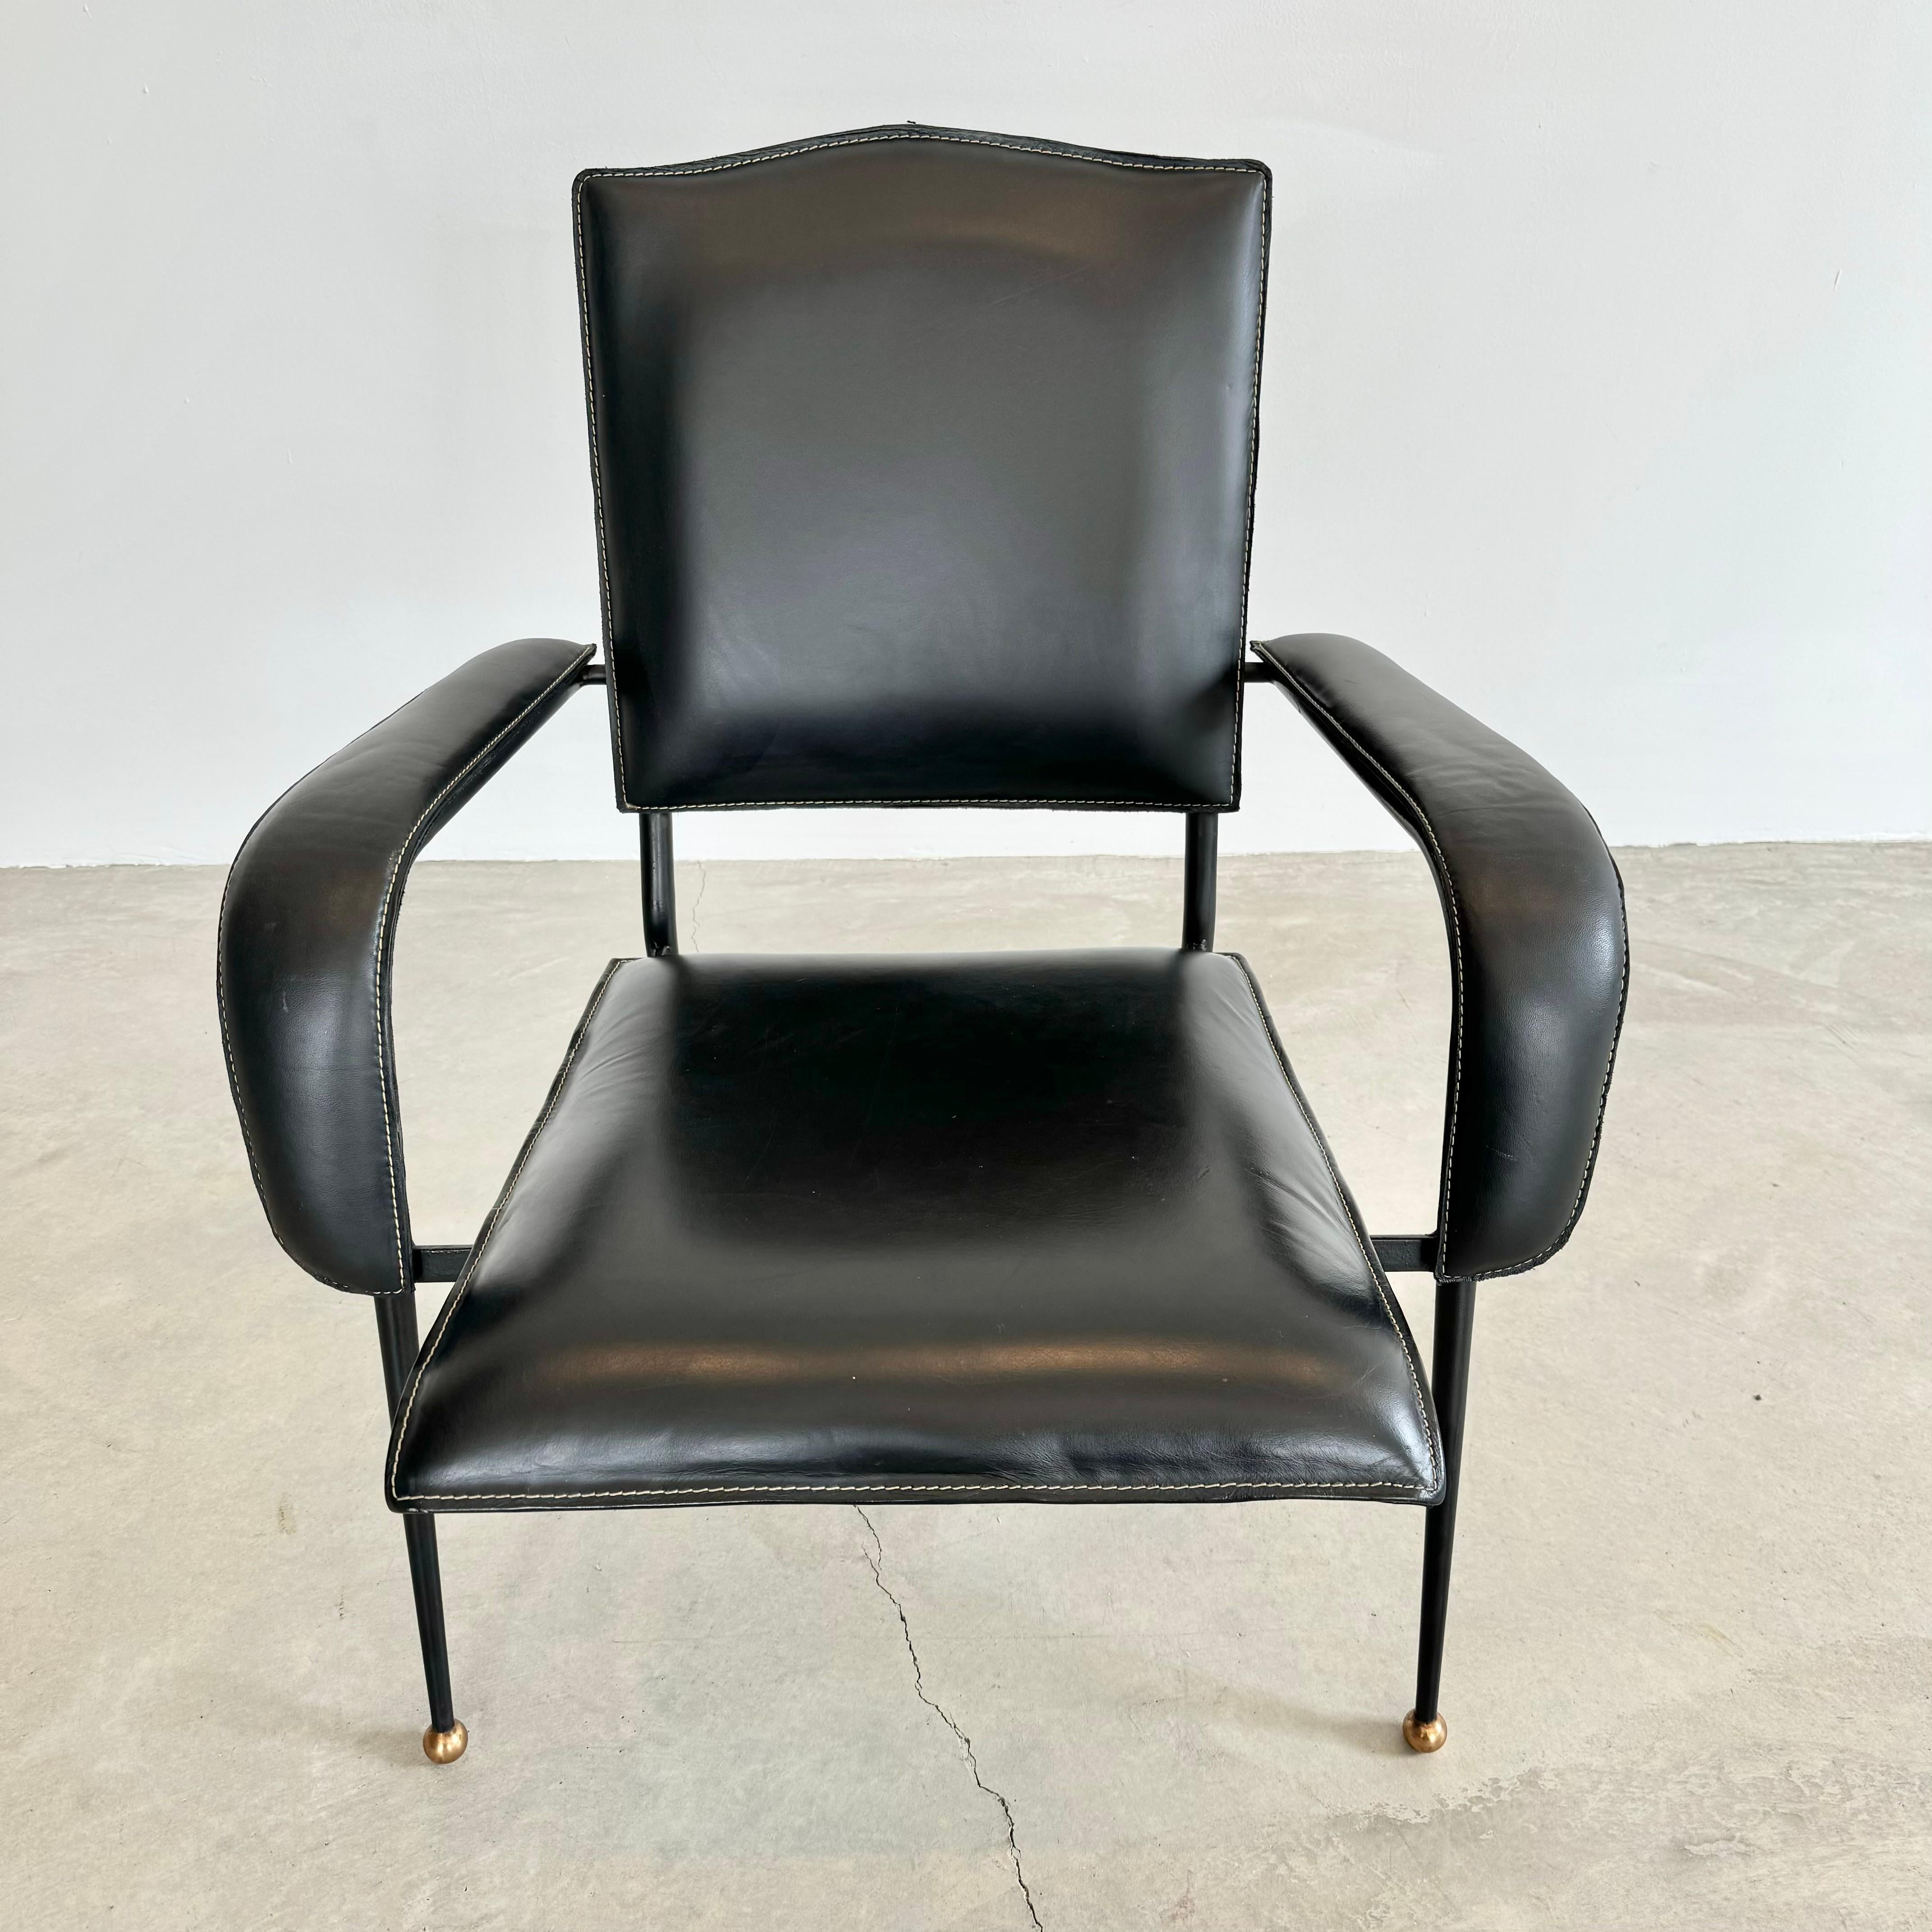 French Jacques Adnet Black Leather Armchair, 1950s France For Sale